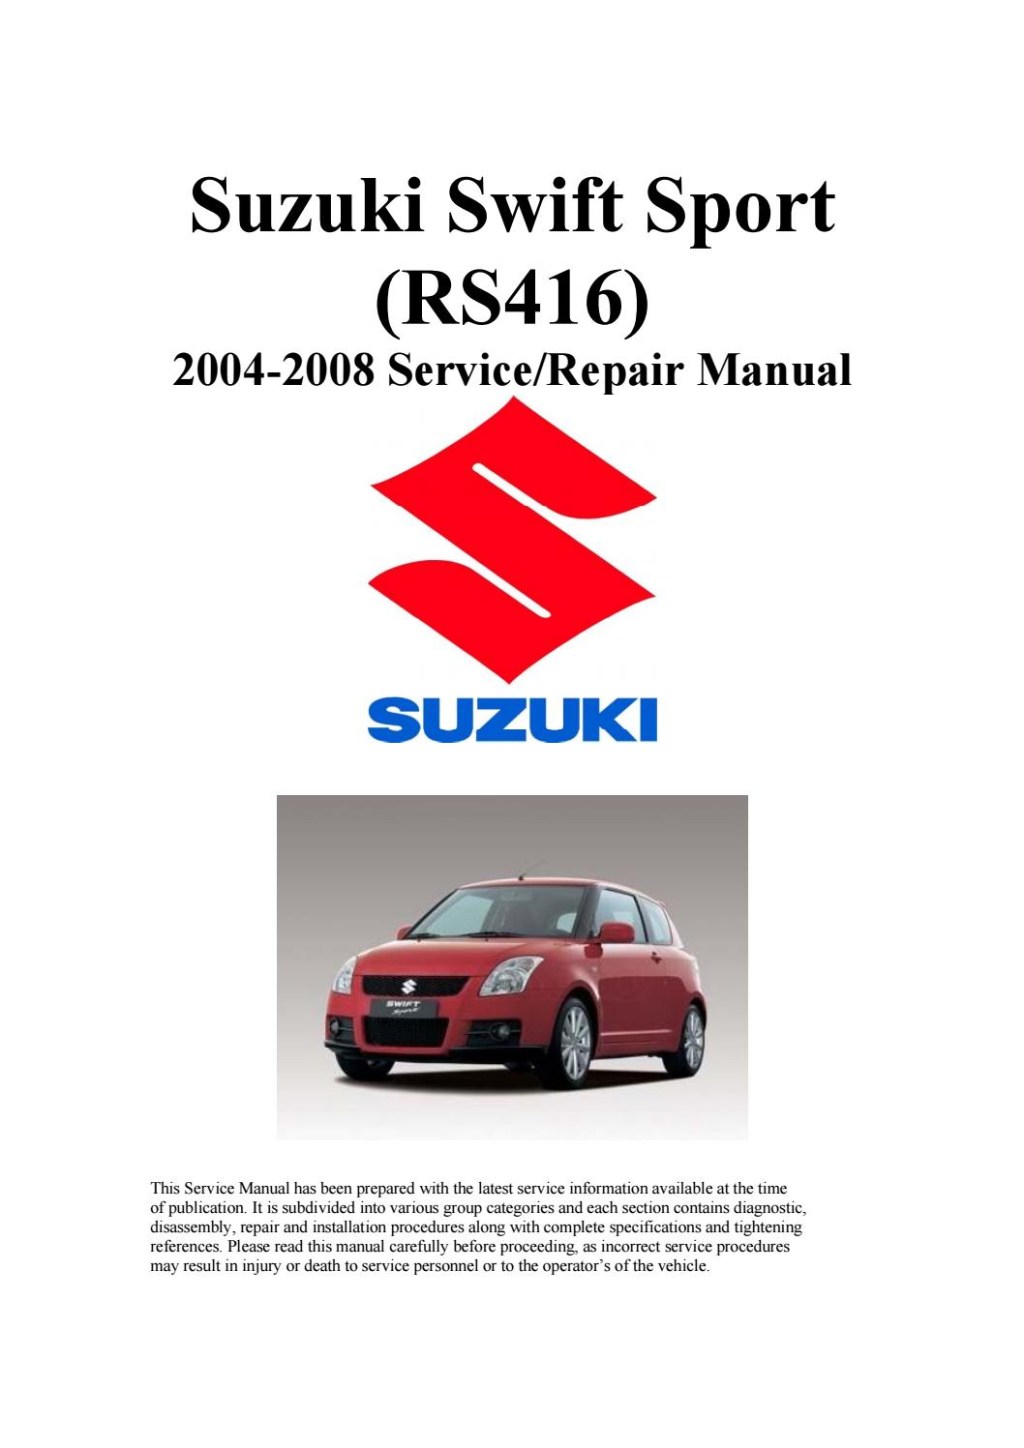 Picture of: Suzuki Swift Sport RS Service Repair Manual by gecv – Issuu